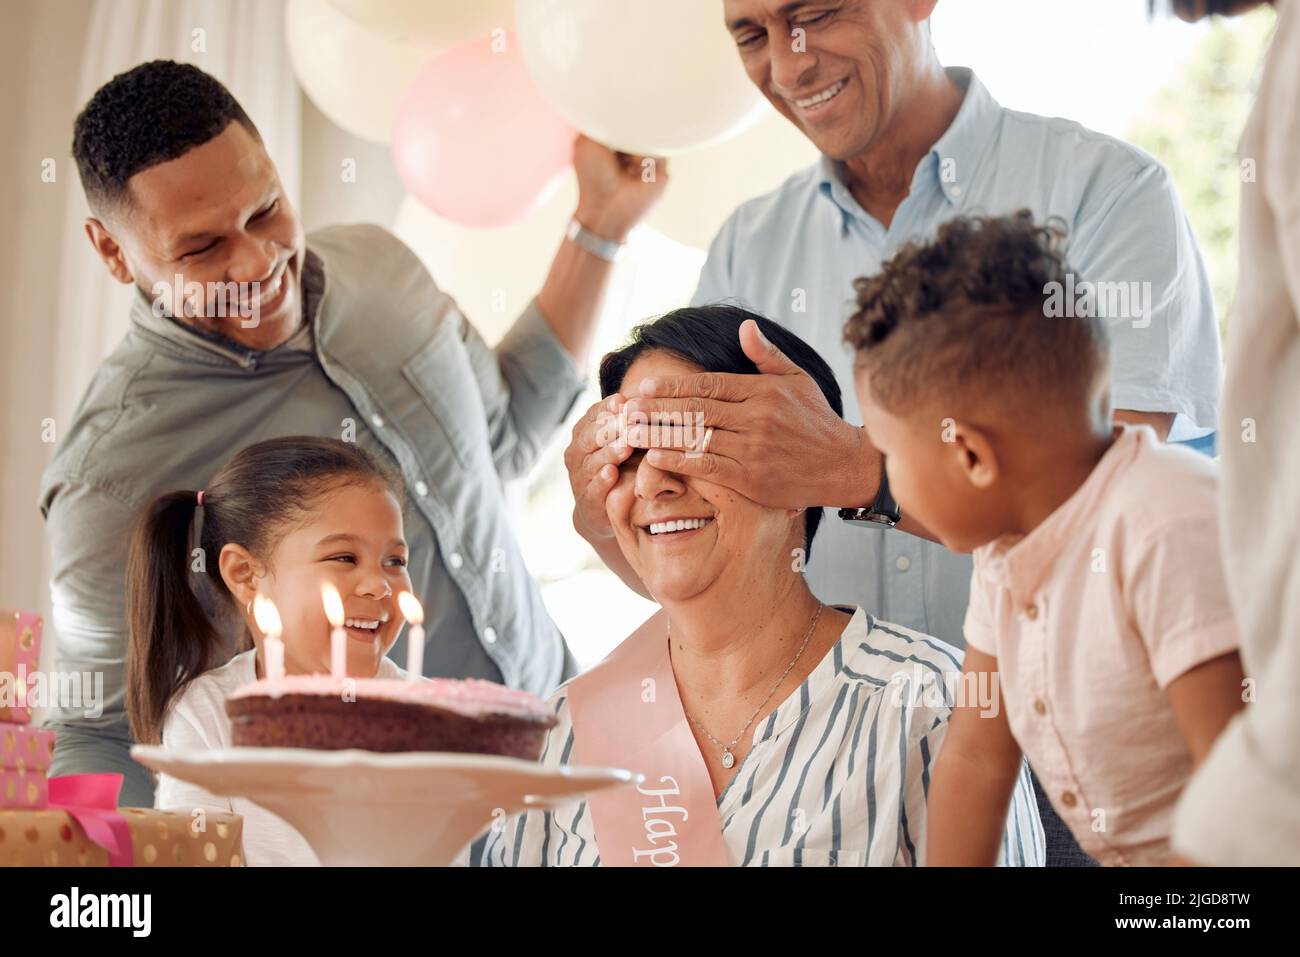 Can I open my eyes yet. a family surprising their mother with a birthday cake at home. Stock Photo